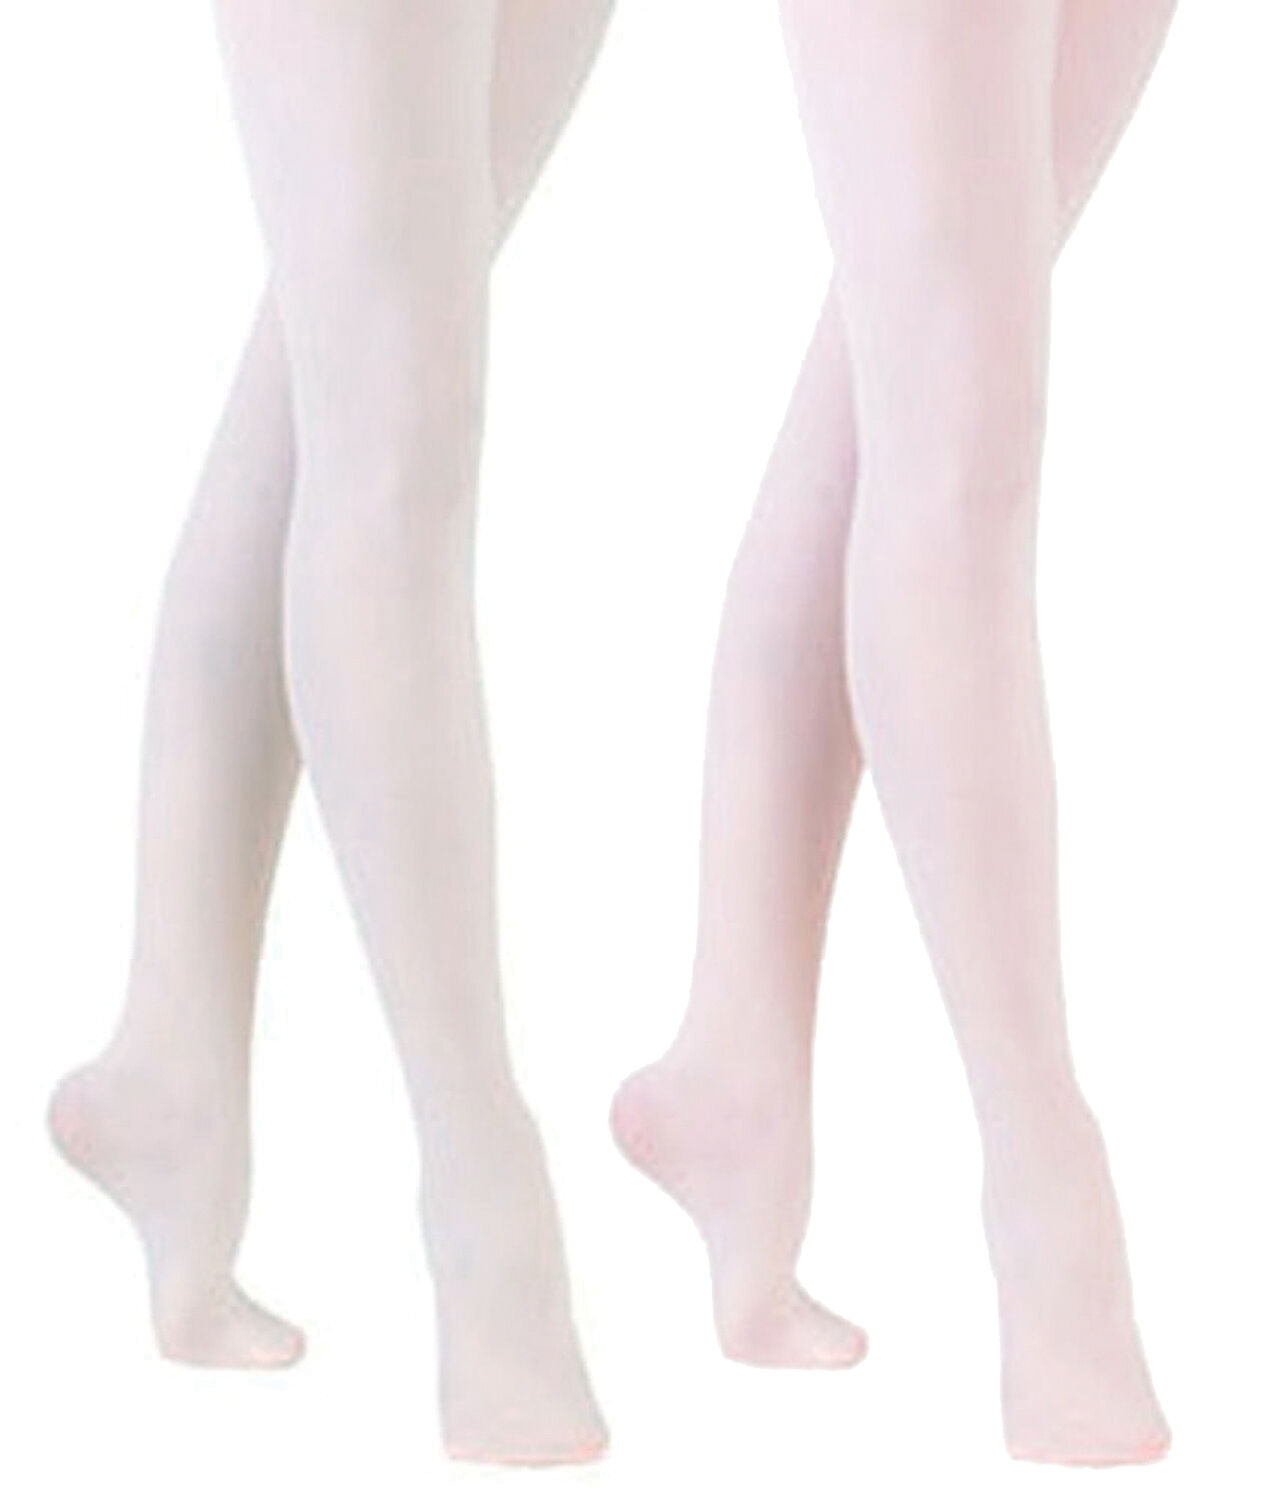 Sock Snob - 1 Pair Girls And Adult Footed Ballet Dance Tights In White Or Pink